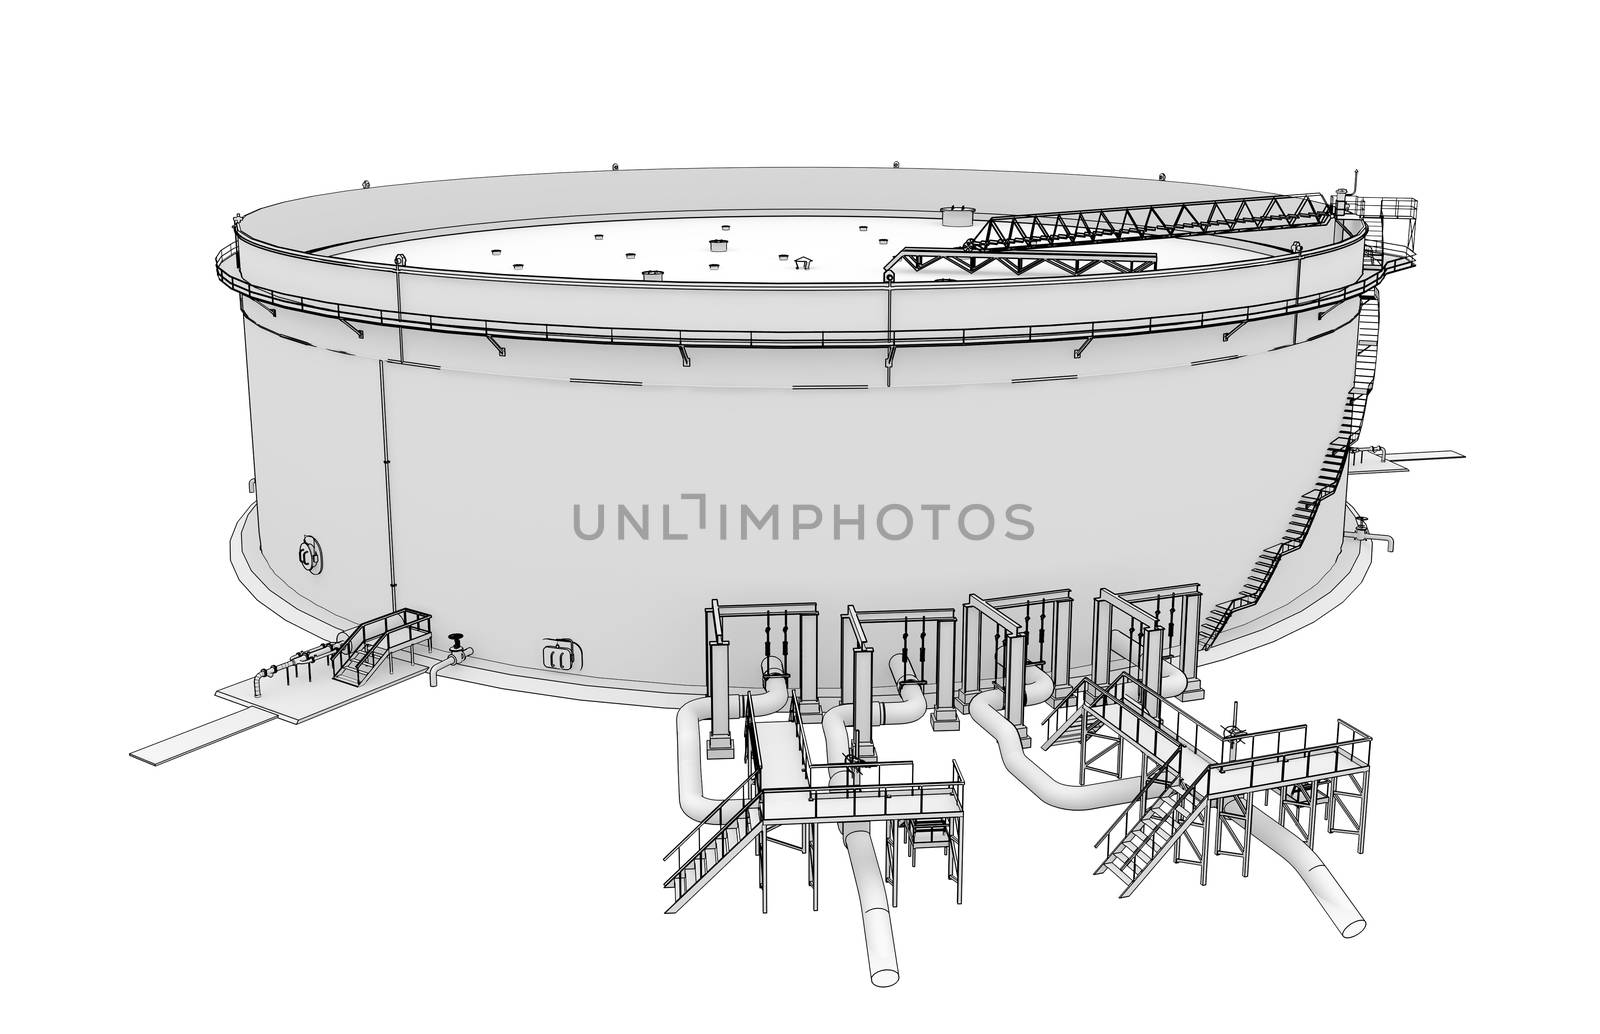 Oil tank rendering in lines. Isolated render on a white background